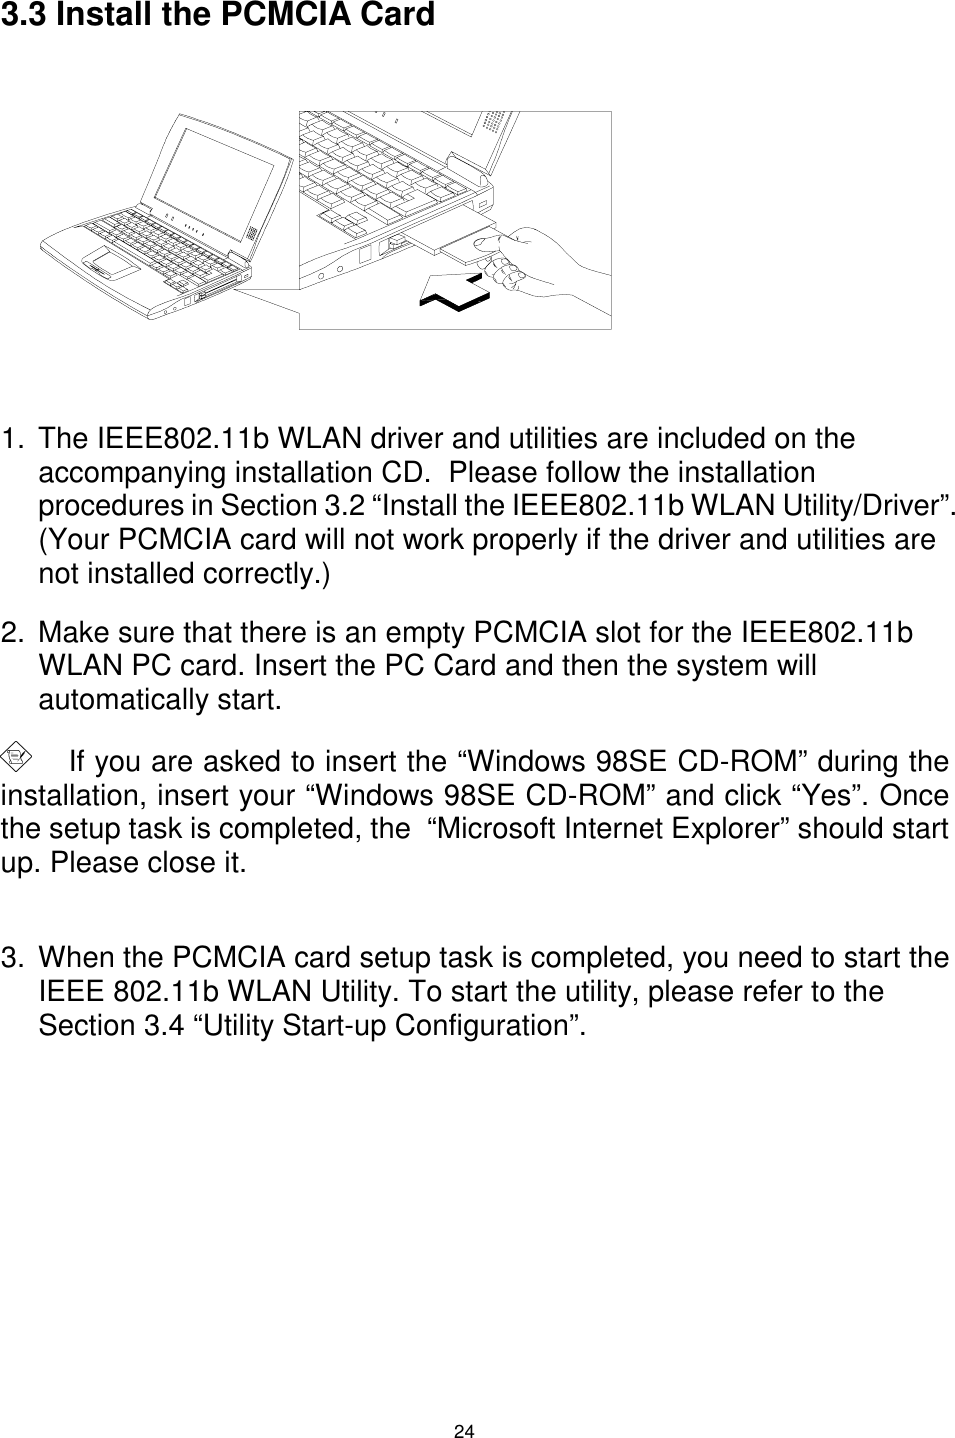  24 3.3 Install the PCMCIA Card          1.  The IEEE802.11b WLAN driver and utilities are included on the accompanying installation CD.  Please follow the installation procedures in Section 3.2 “Install the IEEE802.11b WLAN Utility/Driver”. (Your PCMCIA card will not work properly if the driver and utilities are not installed correctly.) 2.  Make sure that there is an empty PCMCIA slot for the IEEE802.11b WLAN PC card. Insert the PC Card and then the system will automatically start.      If you are asked to insert the “Windows 98SE CD-ROM” during the installation, insert your “Windows 98SE CD-ROM” and click “Yes”. Once the setup task is completed, the  “Microsoft Internet Explorer” should start up. Please close it.    3.  When the PCMCIA card setup task is completed, you need to start the IEEE 802.11b WLAN Utility. To start the utility, please refer to the Section 3.4 “Utility Start-up Configuration”. 